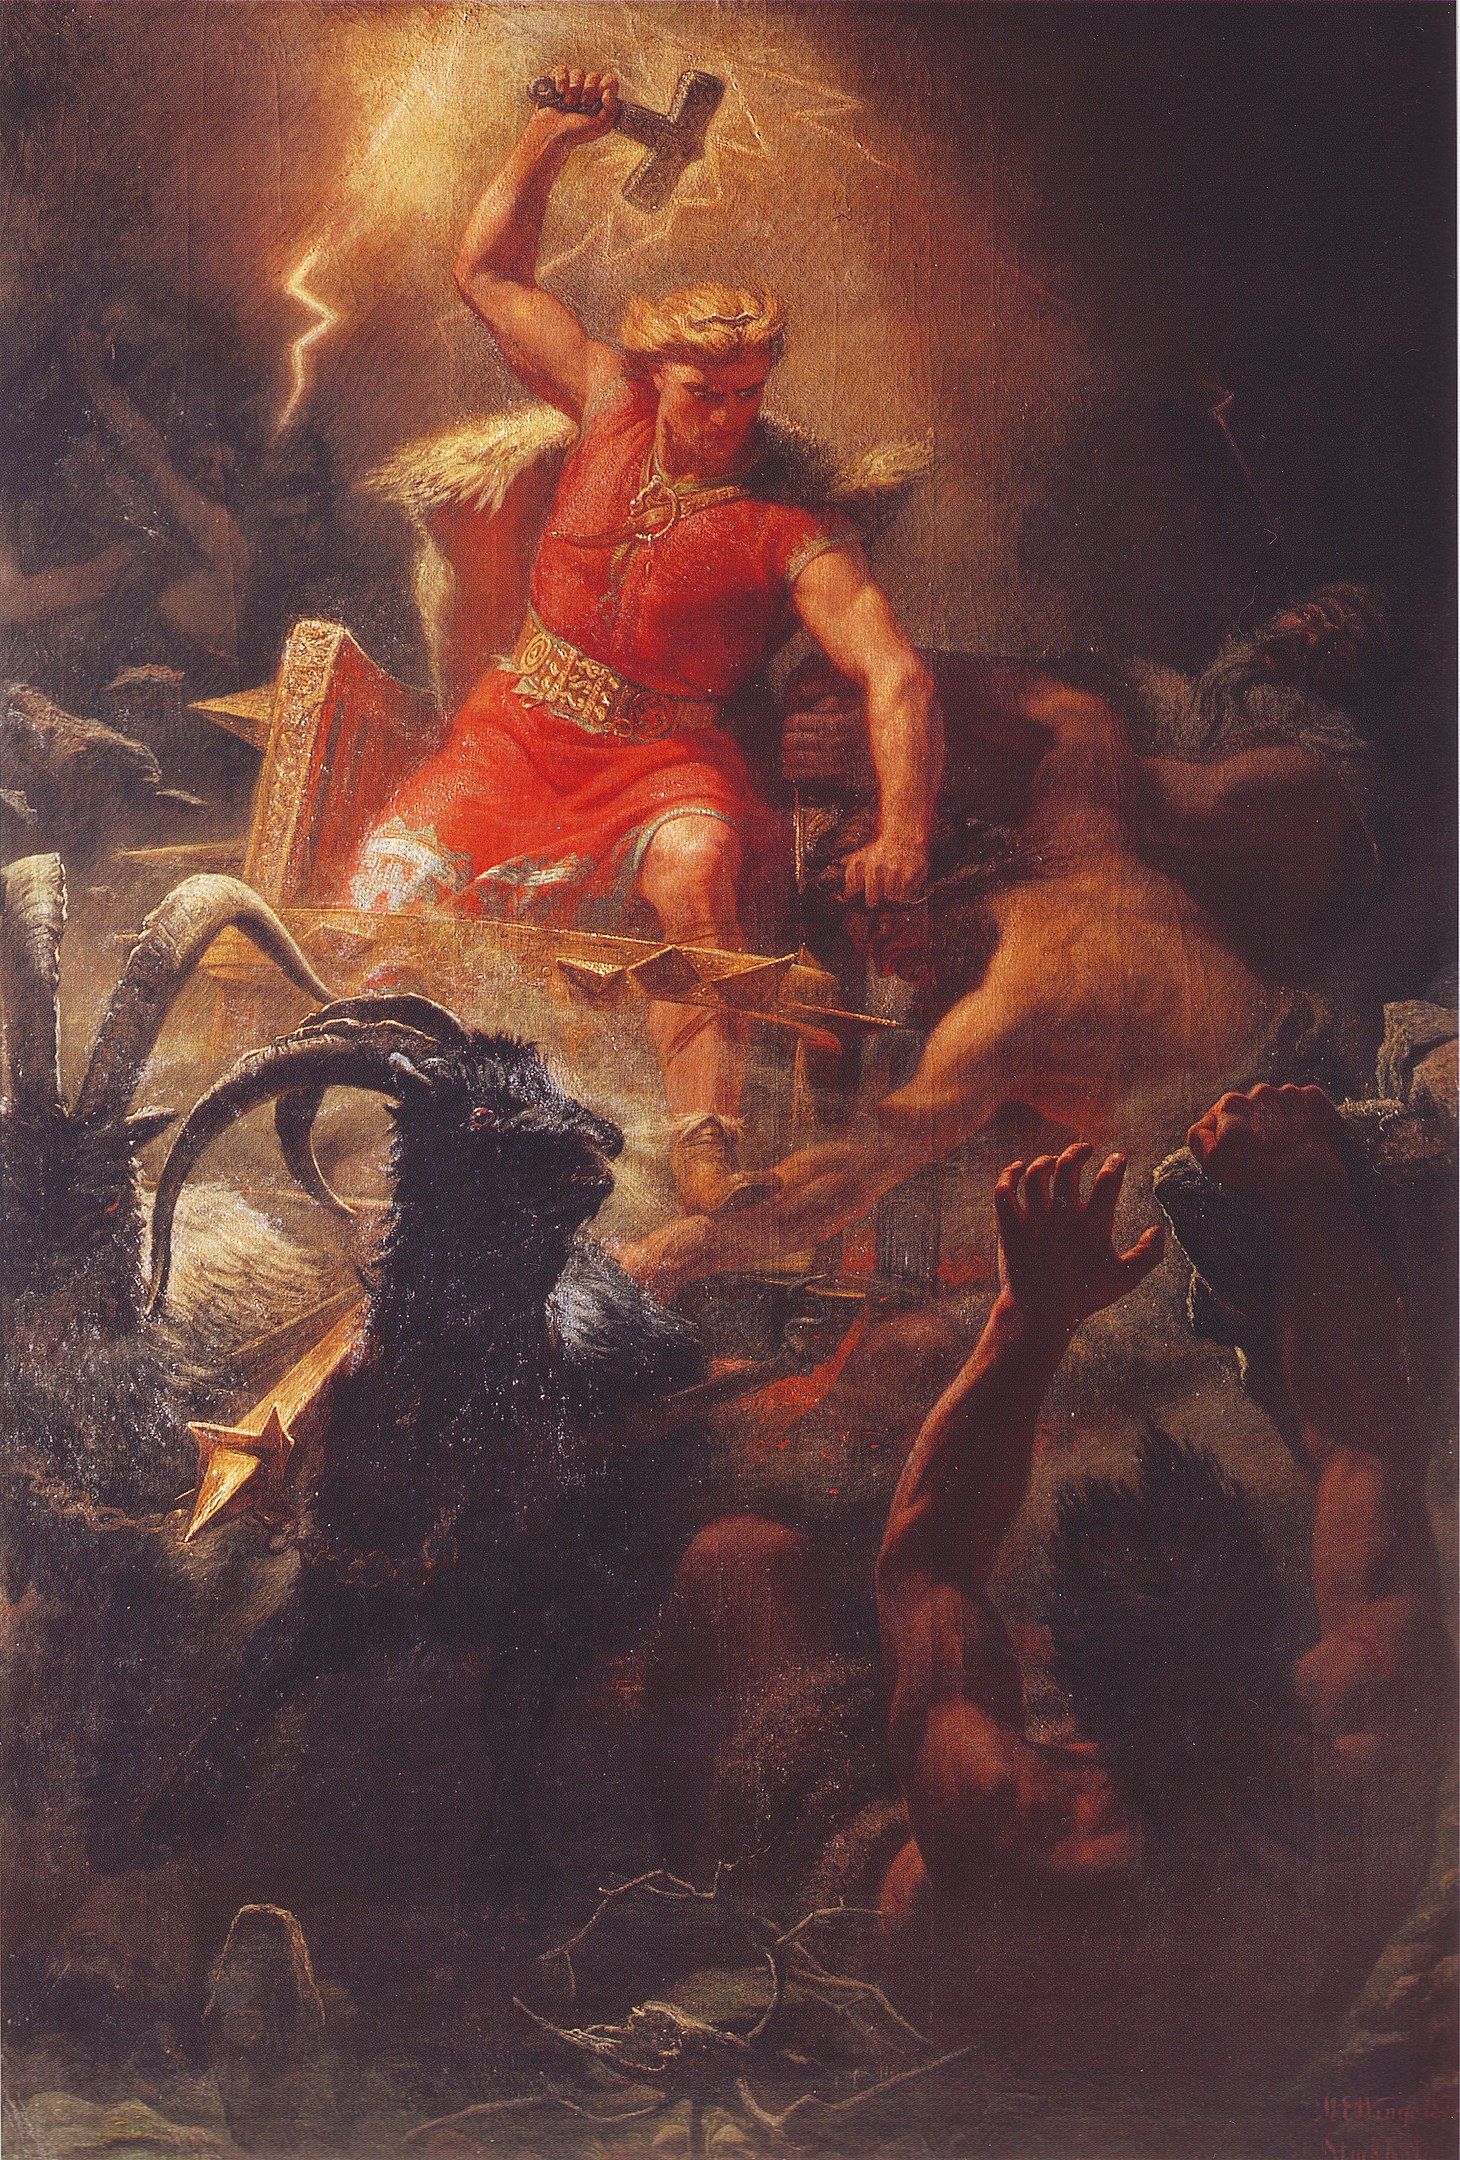 A god raising his hammer and battling with ferocious beasts